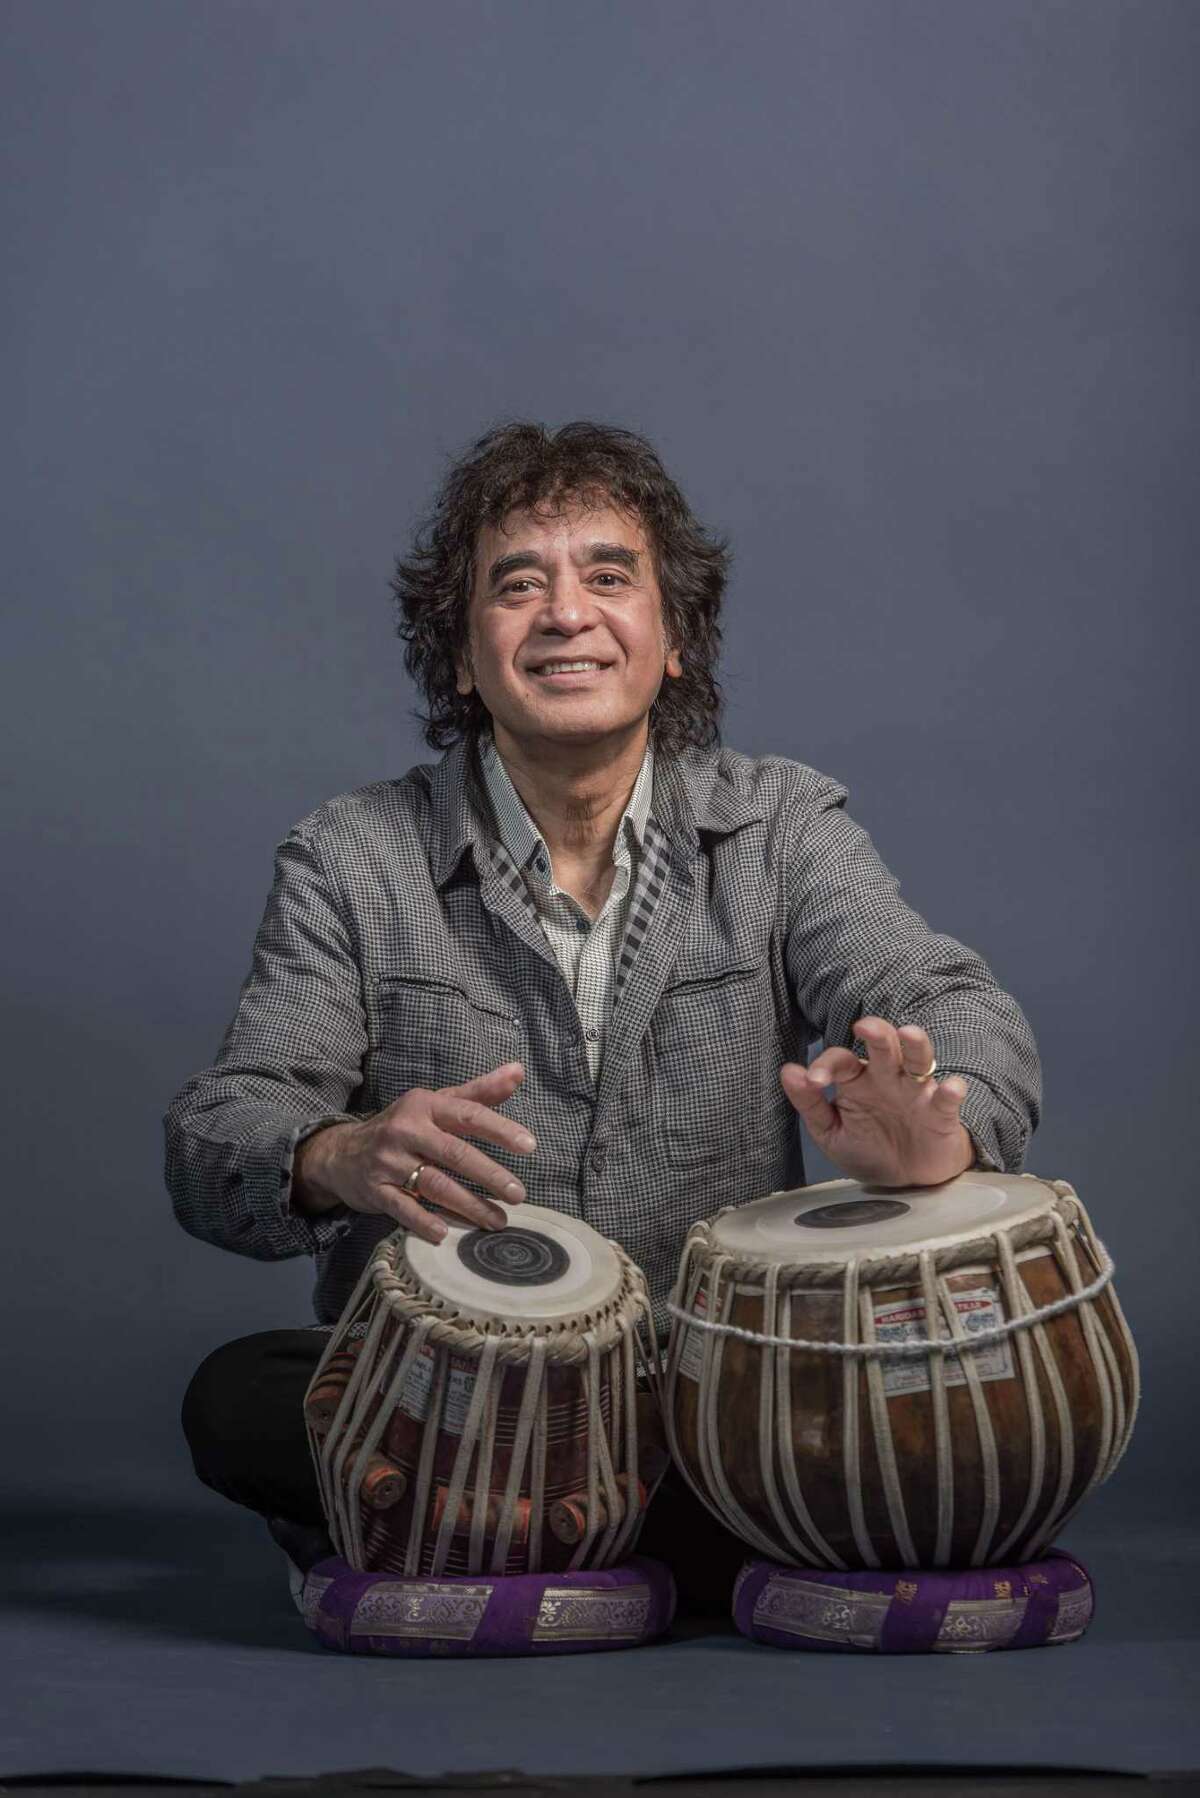 The Indo-American Association brings Zakir Hussain and his "Masters of Percussion" show to the Wortham Theater Center on April 10.